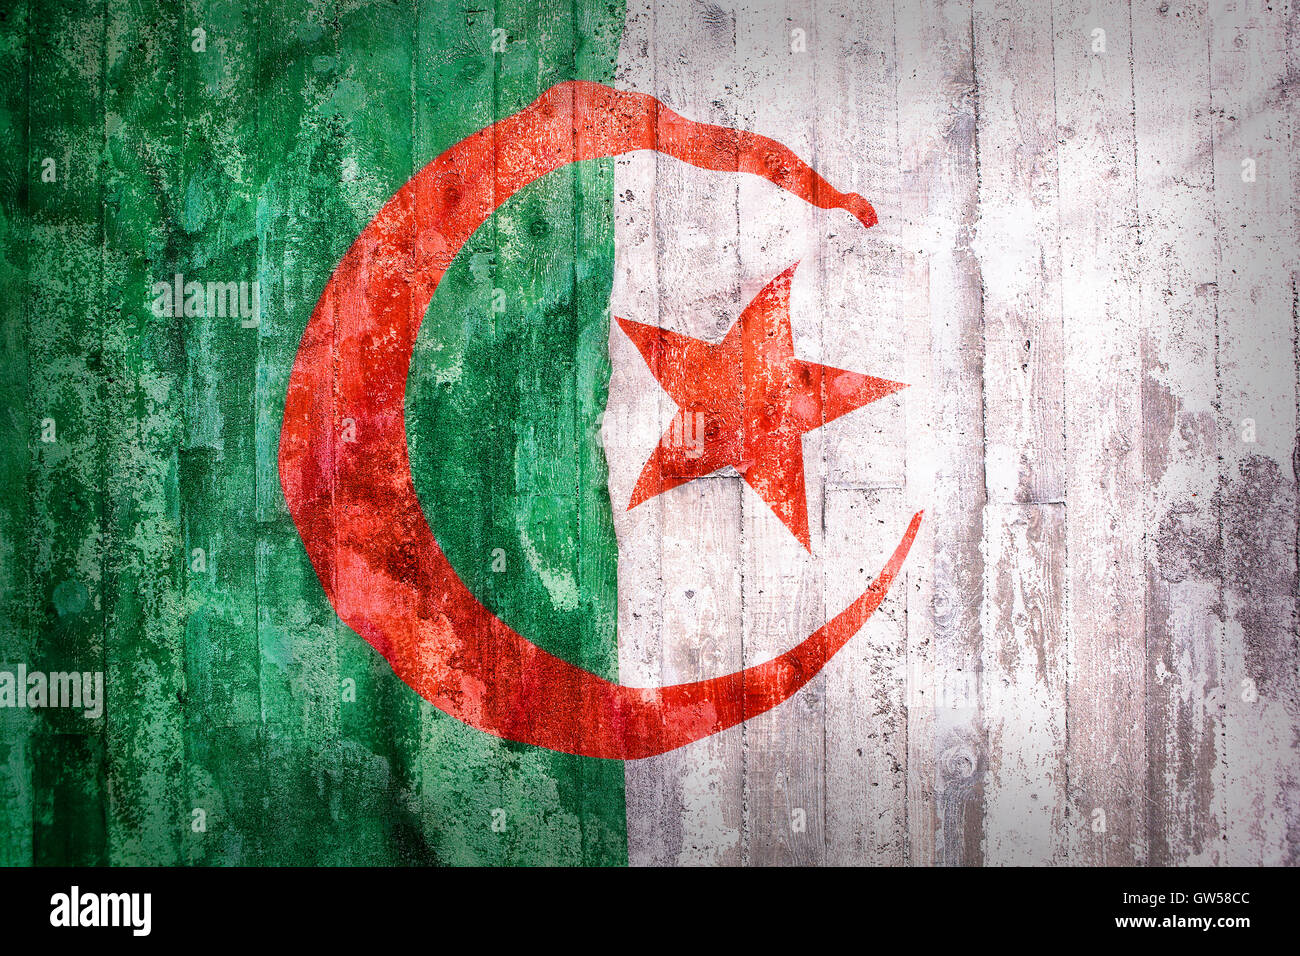 Grunge style of Algeria flag on a brick wall for background Stock Photo